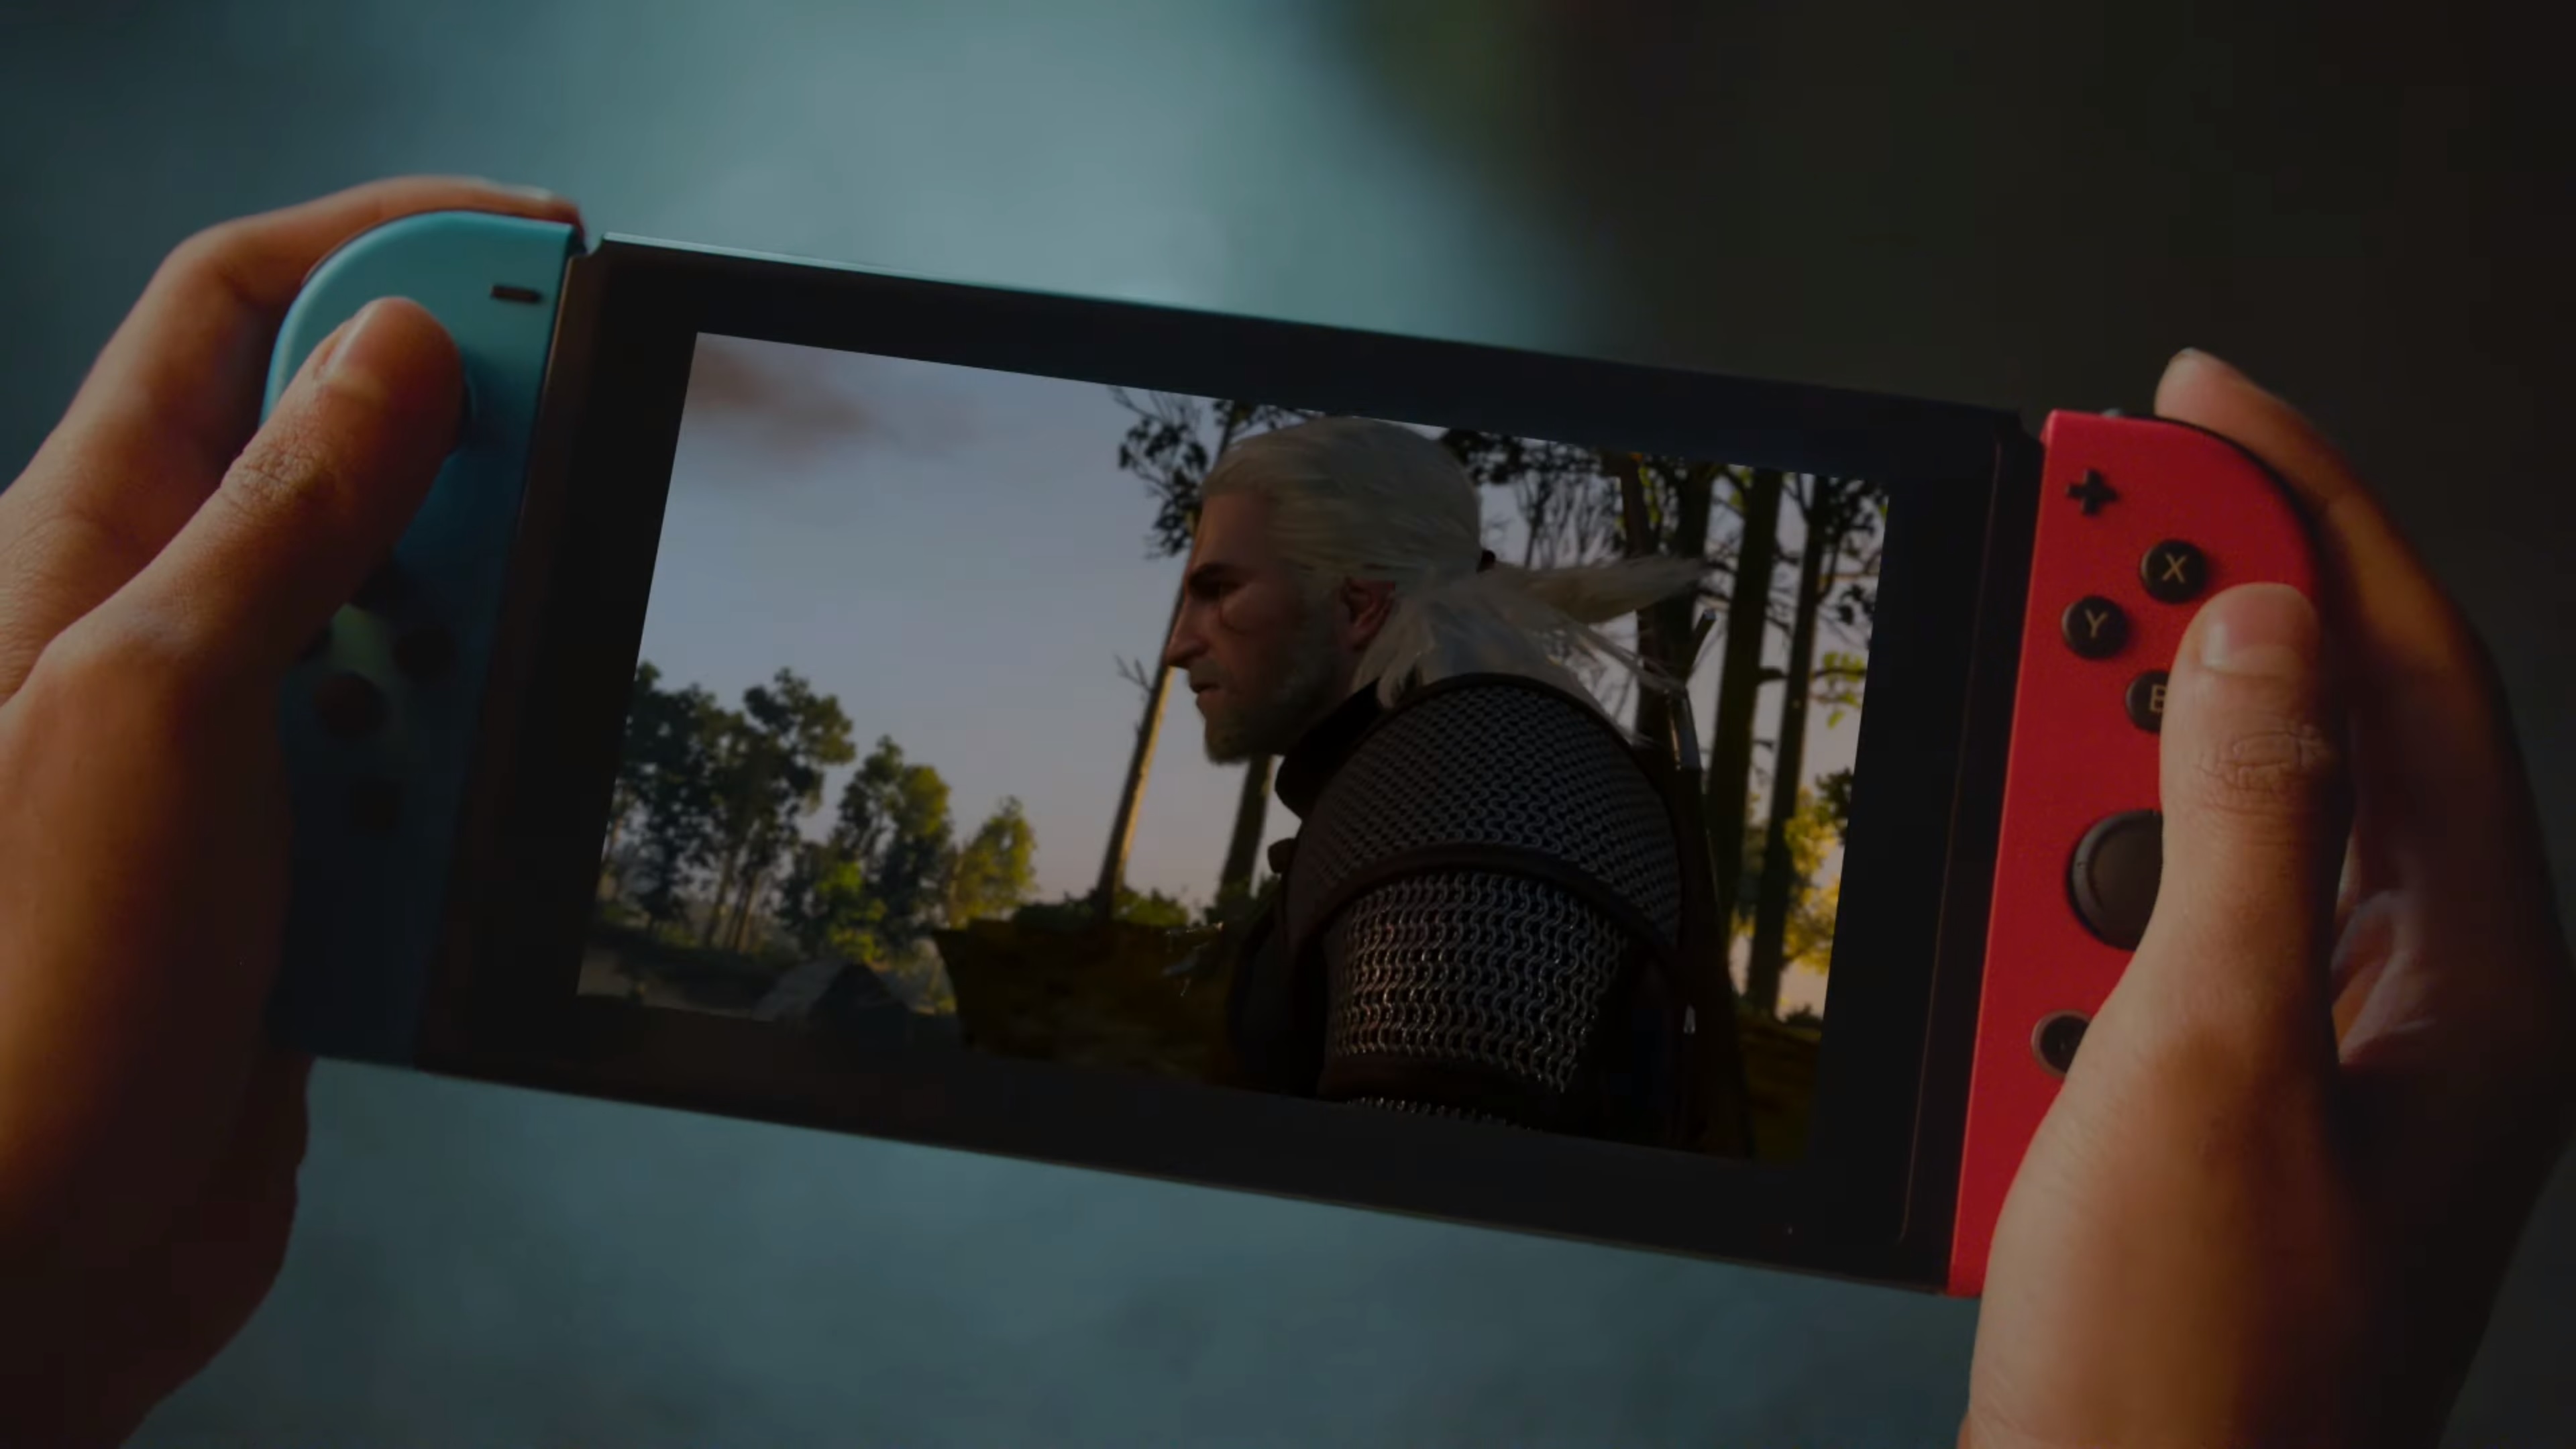 barbering Tilbageholde skak Video: Nintendo highlights The Witcher 3 and Overwatch in new Switch  commercial